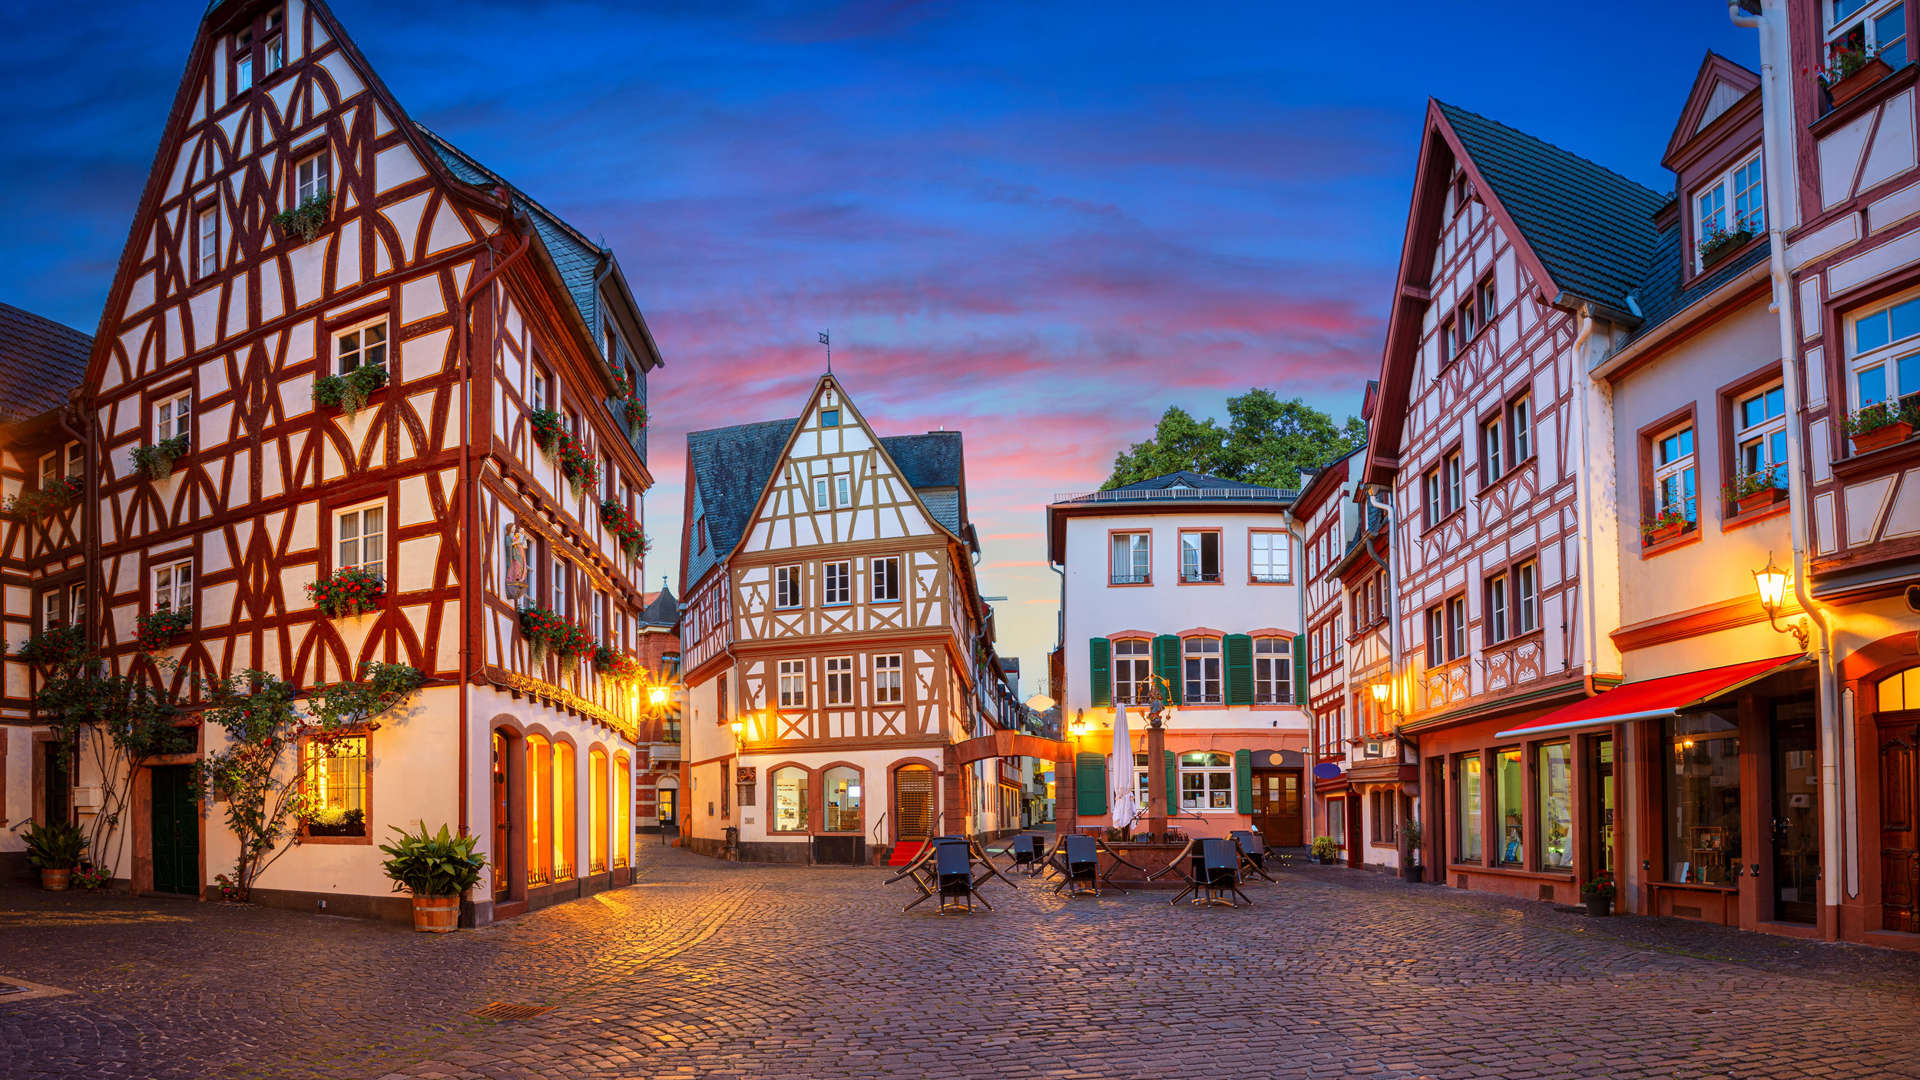 Town centre, Mainz, Germany